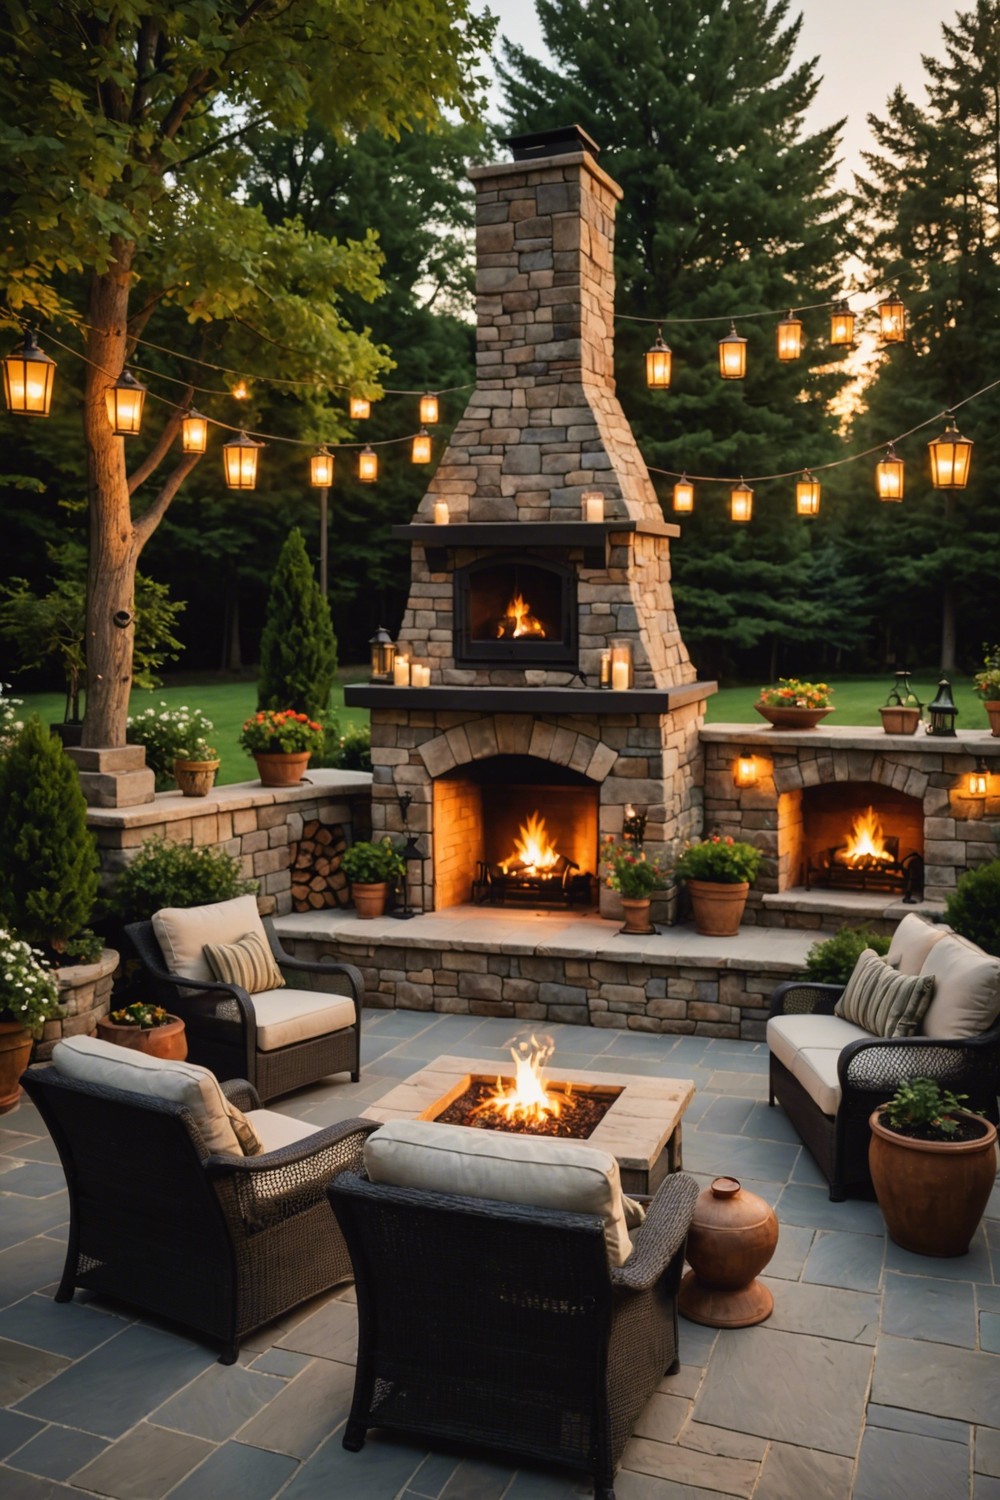 Modern Stone Fireplace with Patio Seating